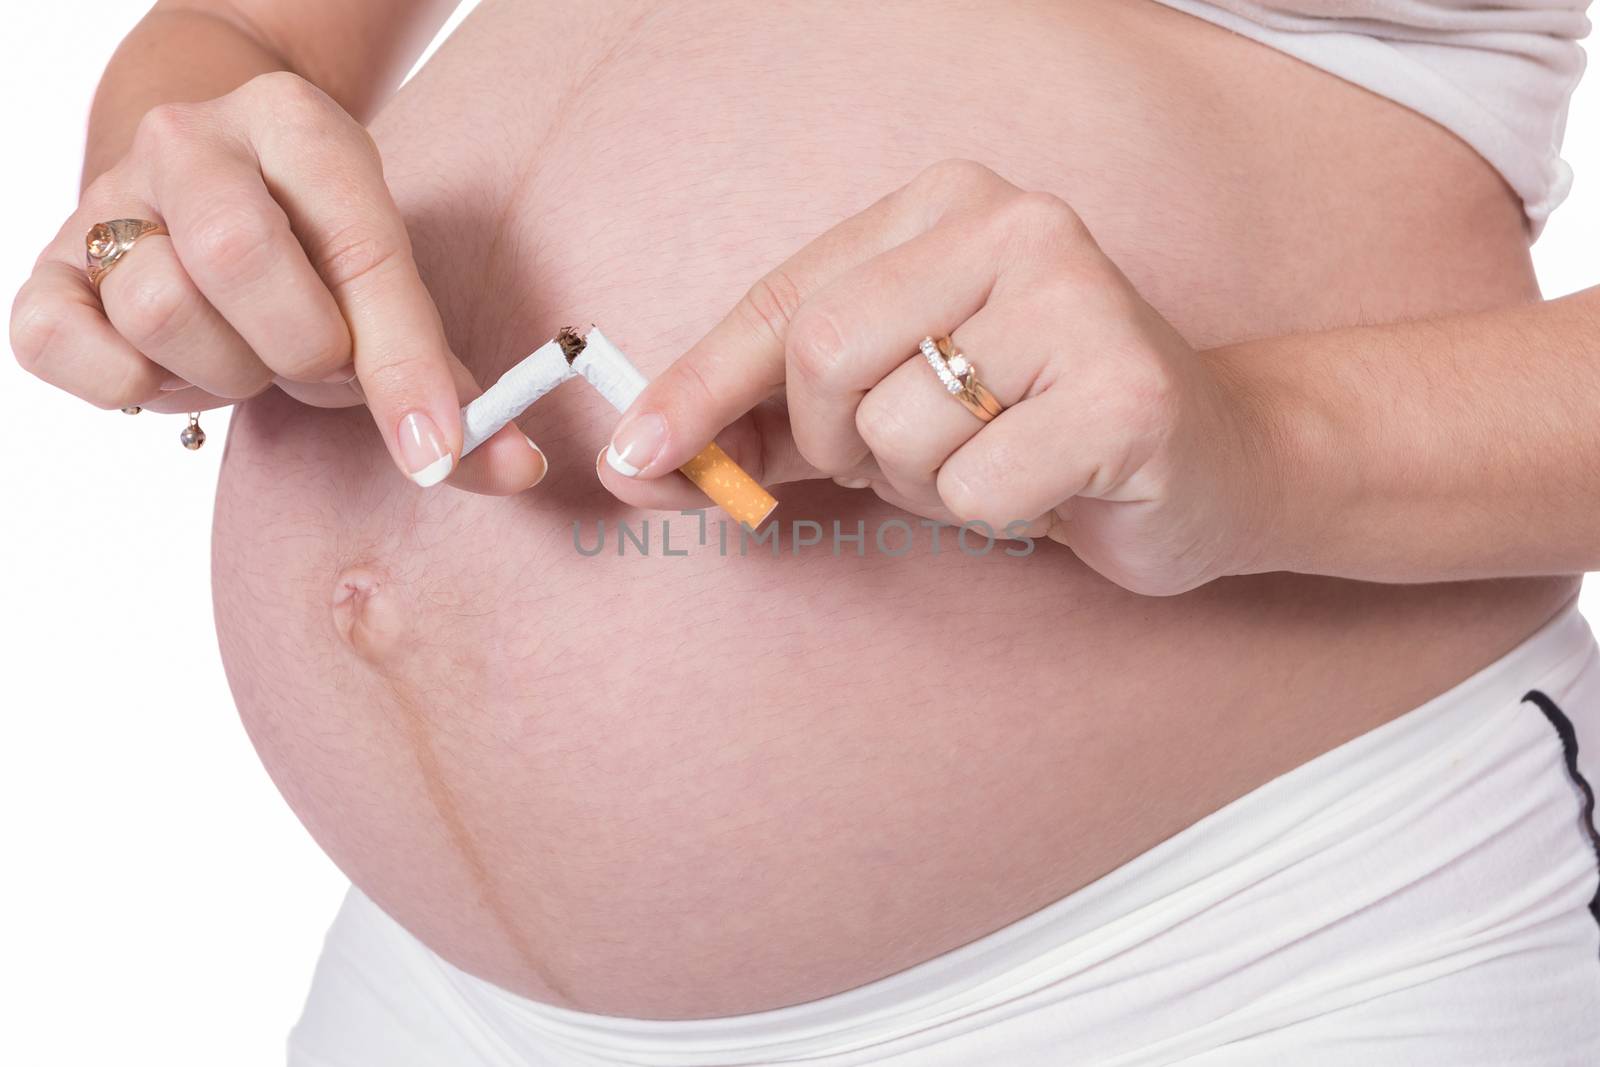 Pregnant woman breaking a cigarette with her hands